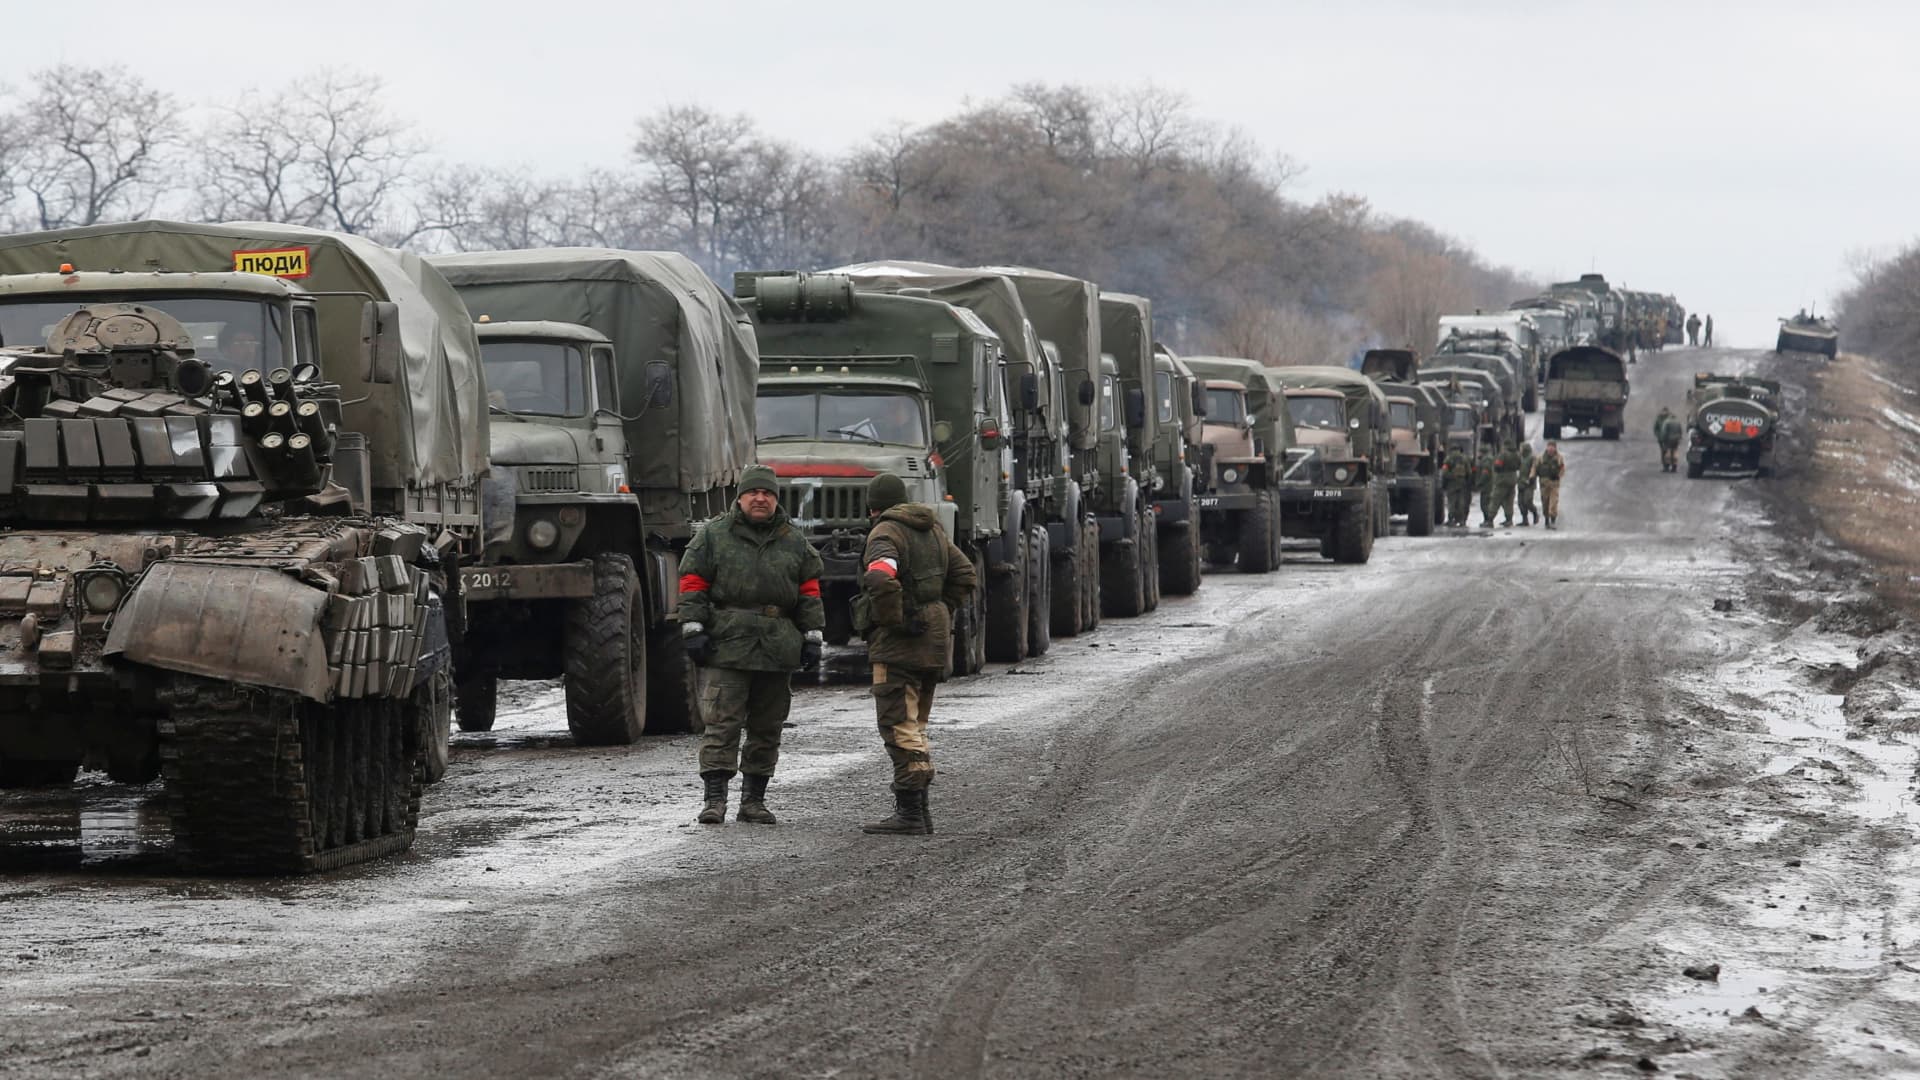 A view shows a military convoy of armed forces of the separatist self-proclaimed Luhansk People's Republic (LNR) on a road in the Luhansk region, Ukraine February 27, 2022.